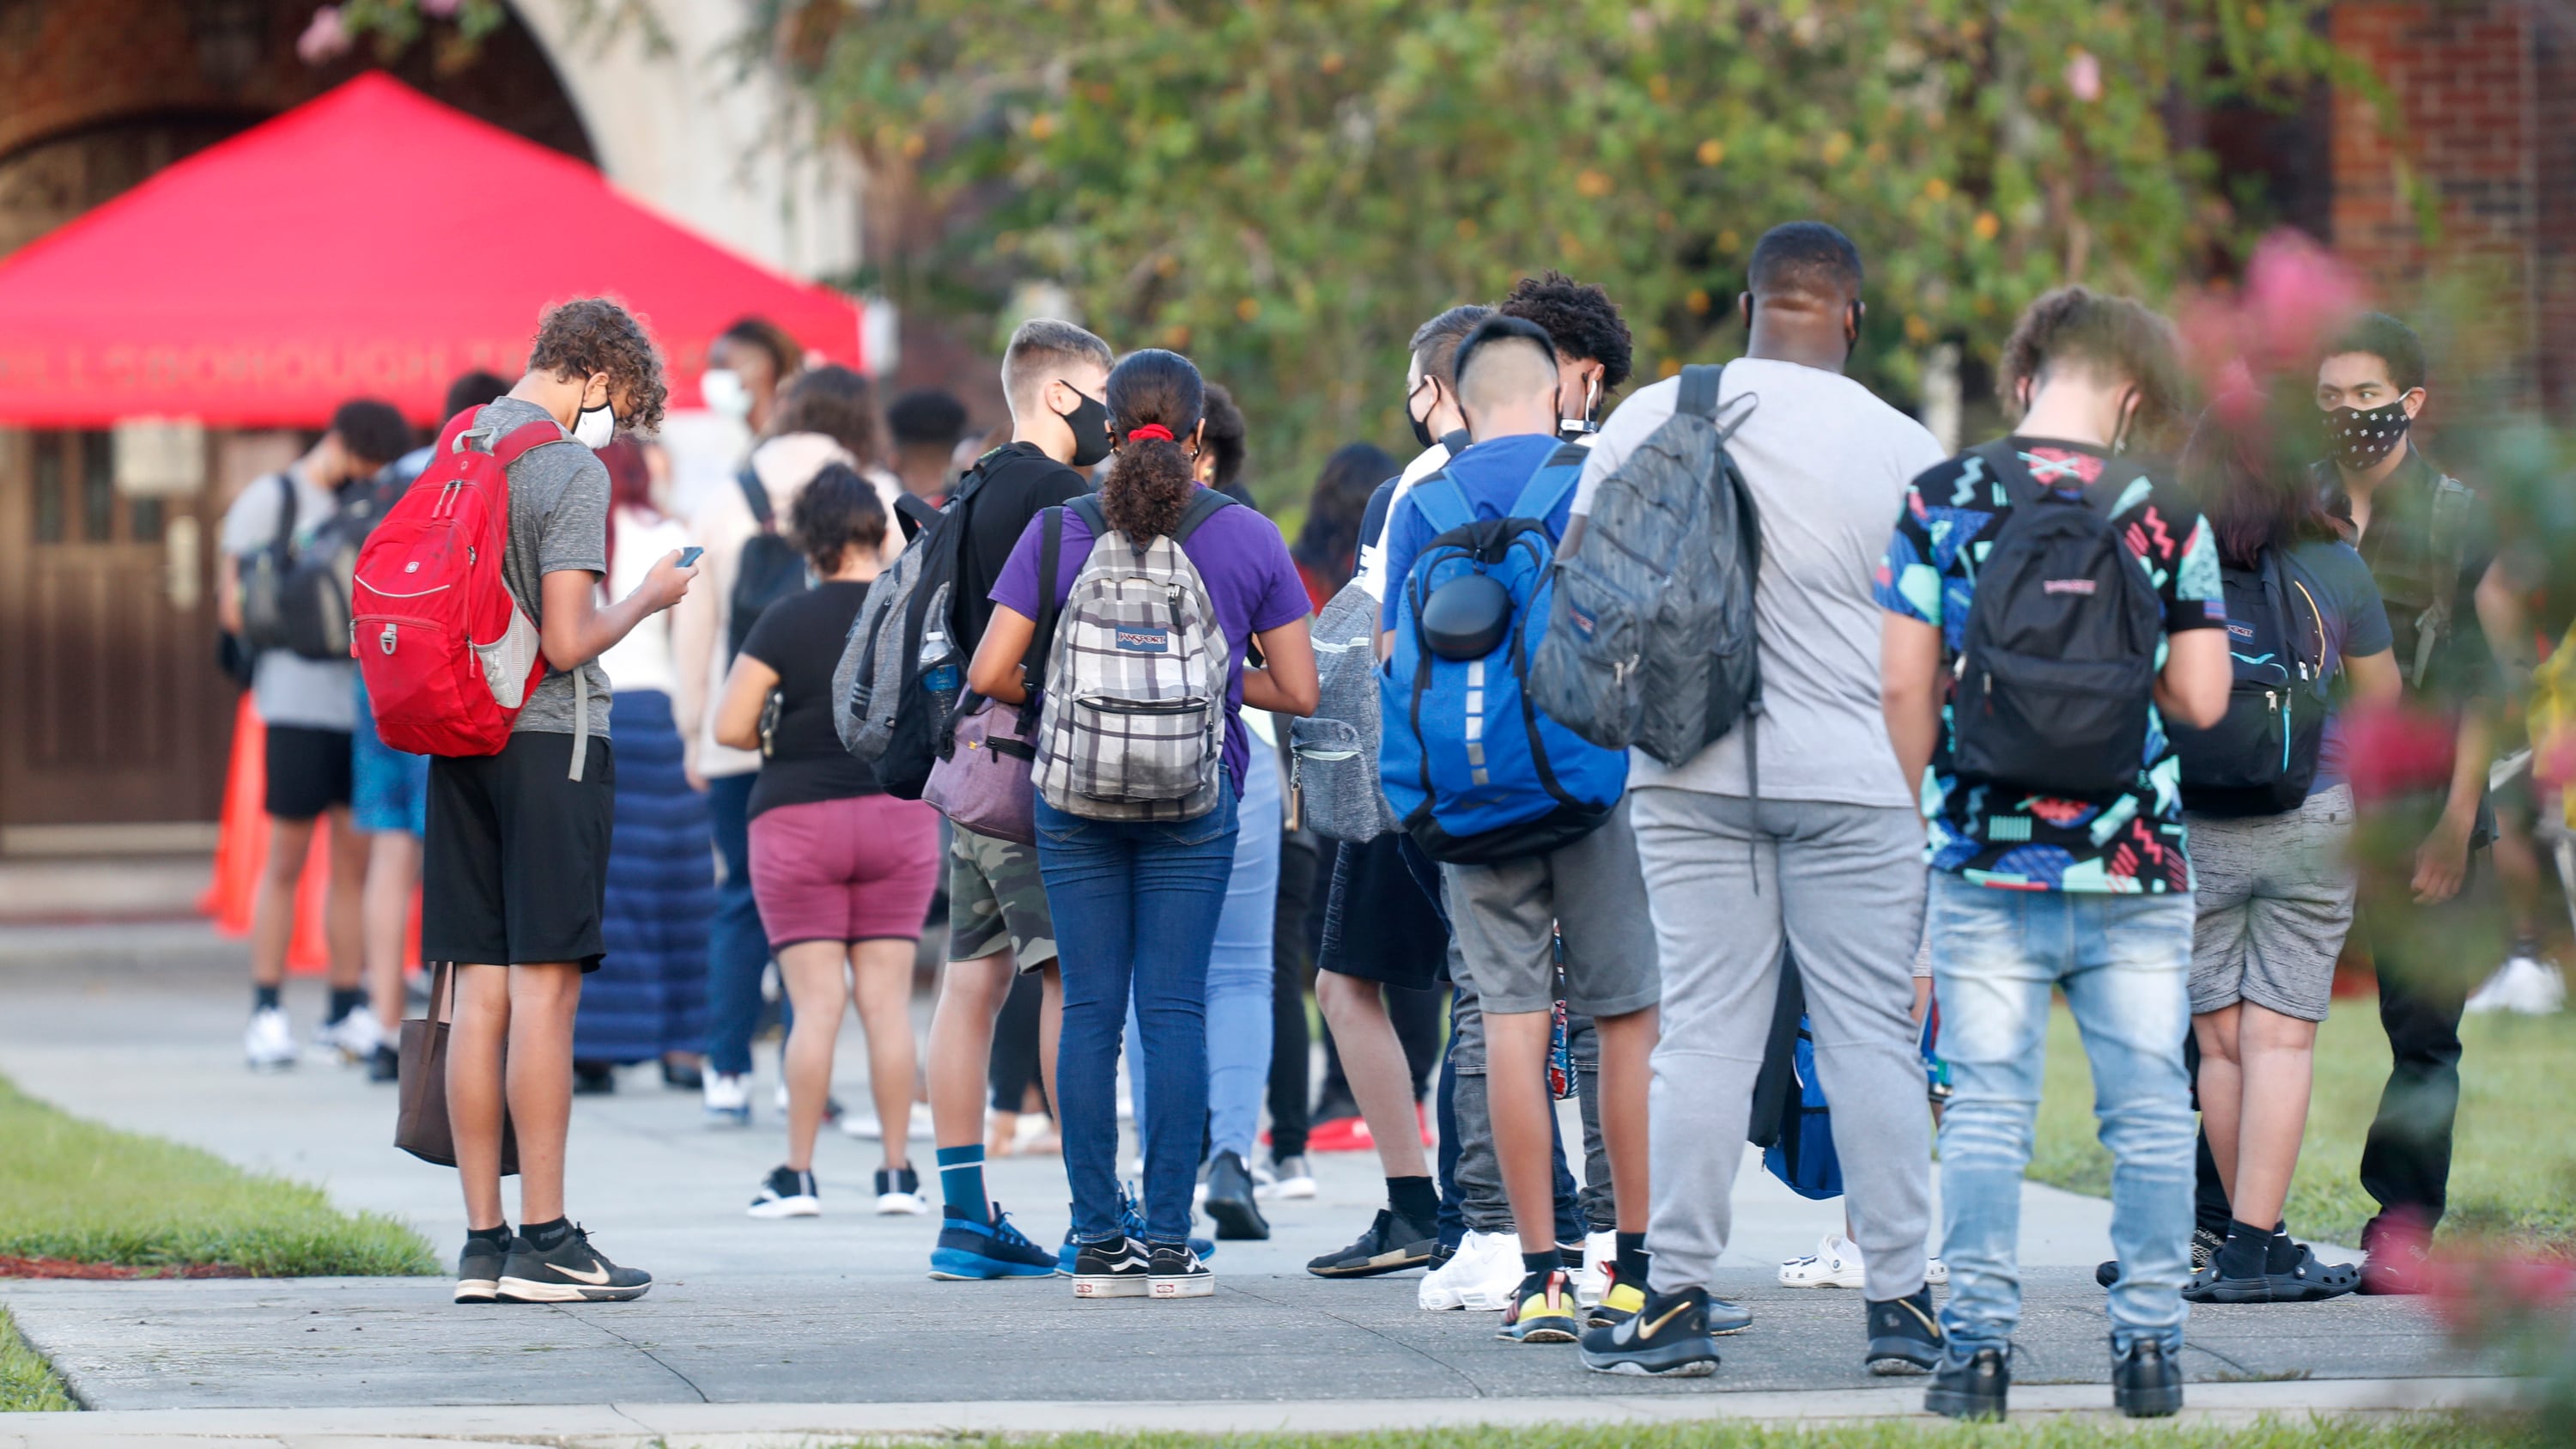 A line of students wearing backpacks and face masks stand in a line outside with trees in the background.